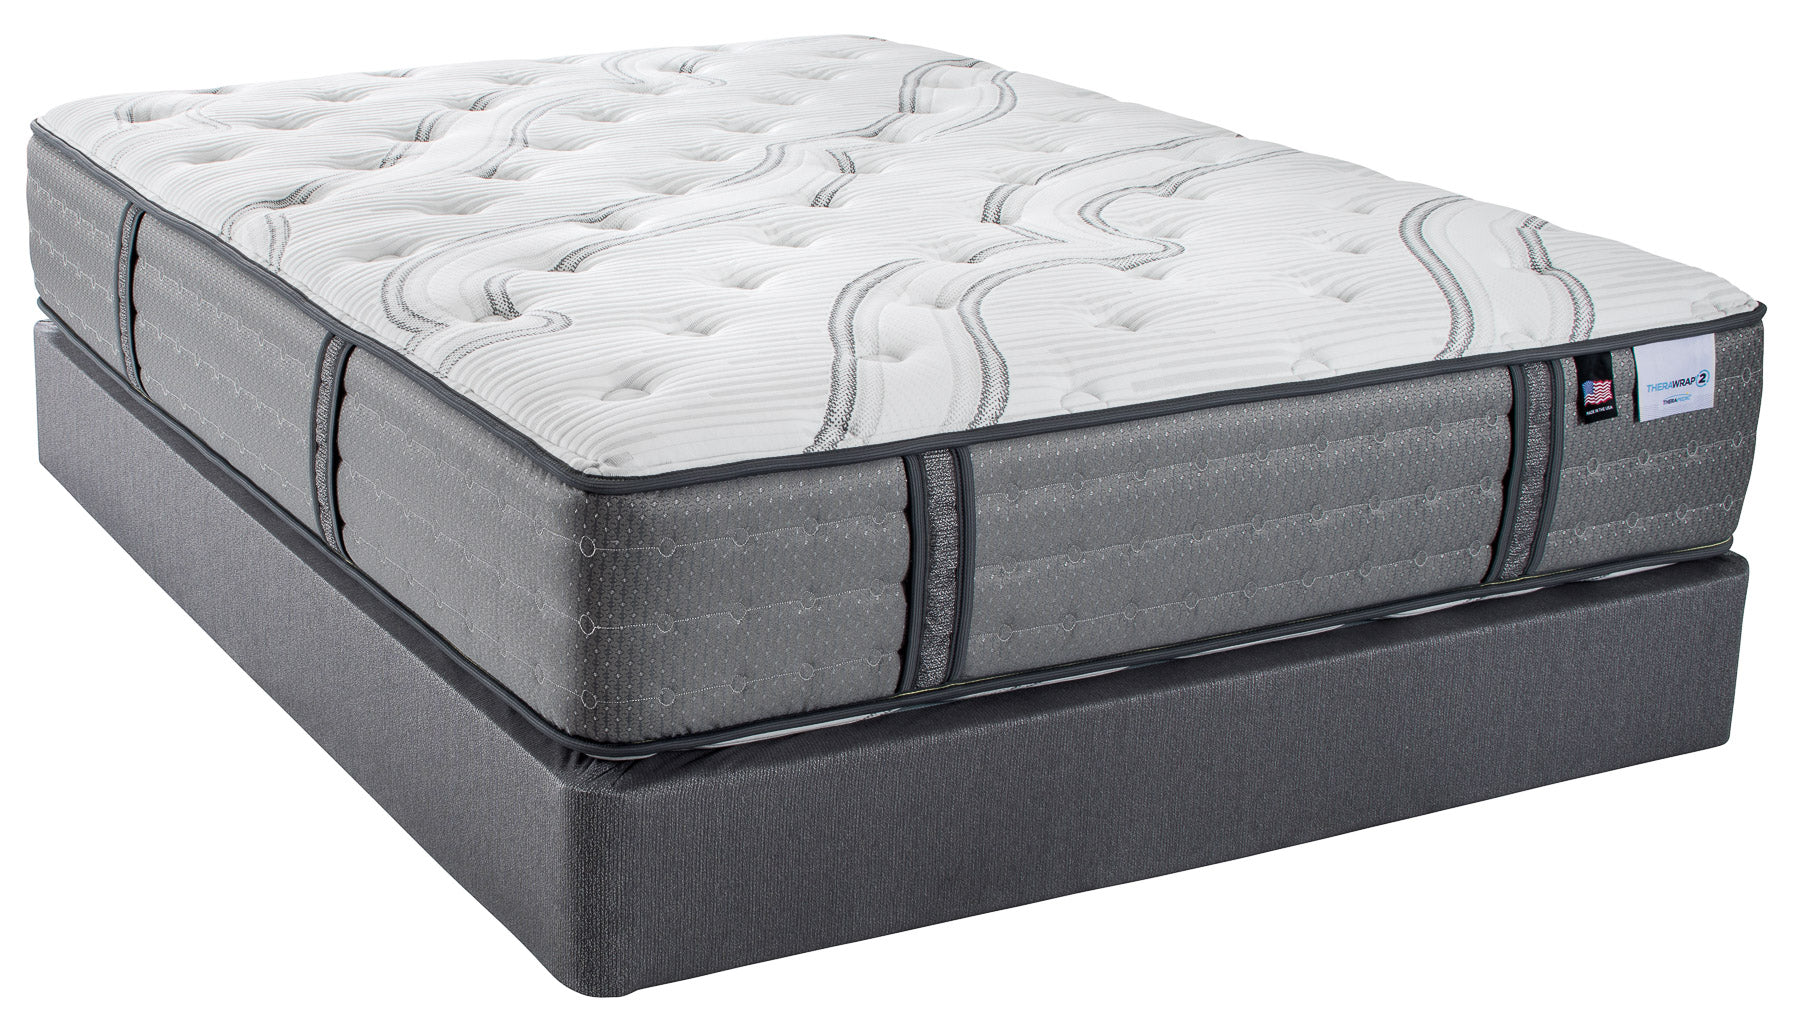 2 Sided "Flip-able" Mattresses